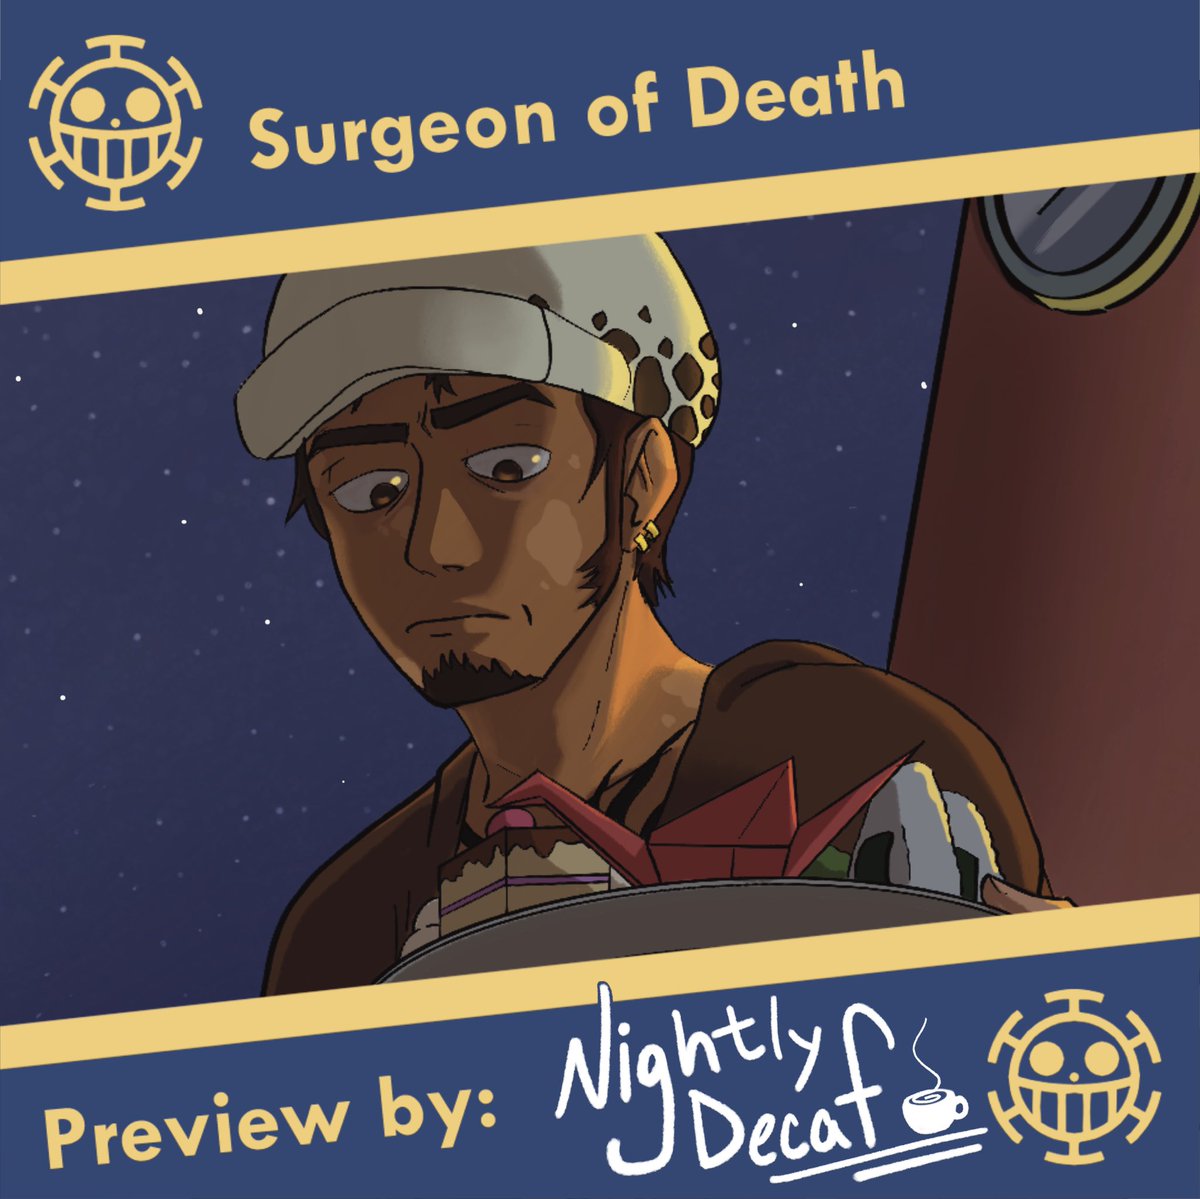 Sharing one of my spot pieces for the Surgeon of Death @Law_Zine 🍙! So excited to accompany @chenziee1358’s amazing fic :D Pre-orders are open now, check out all the other lovely pieces everyone has worked so hard on!! All proceeds go towards a great cause 💛